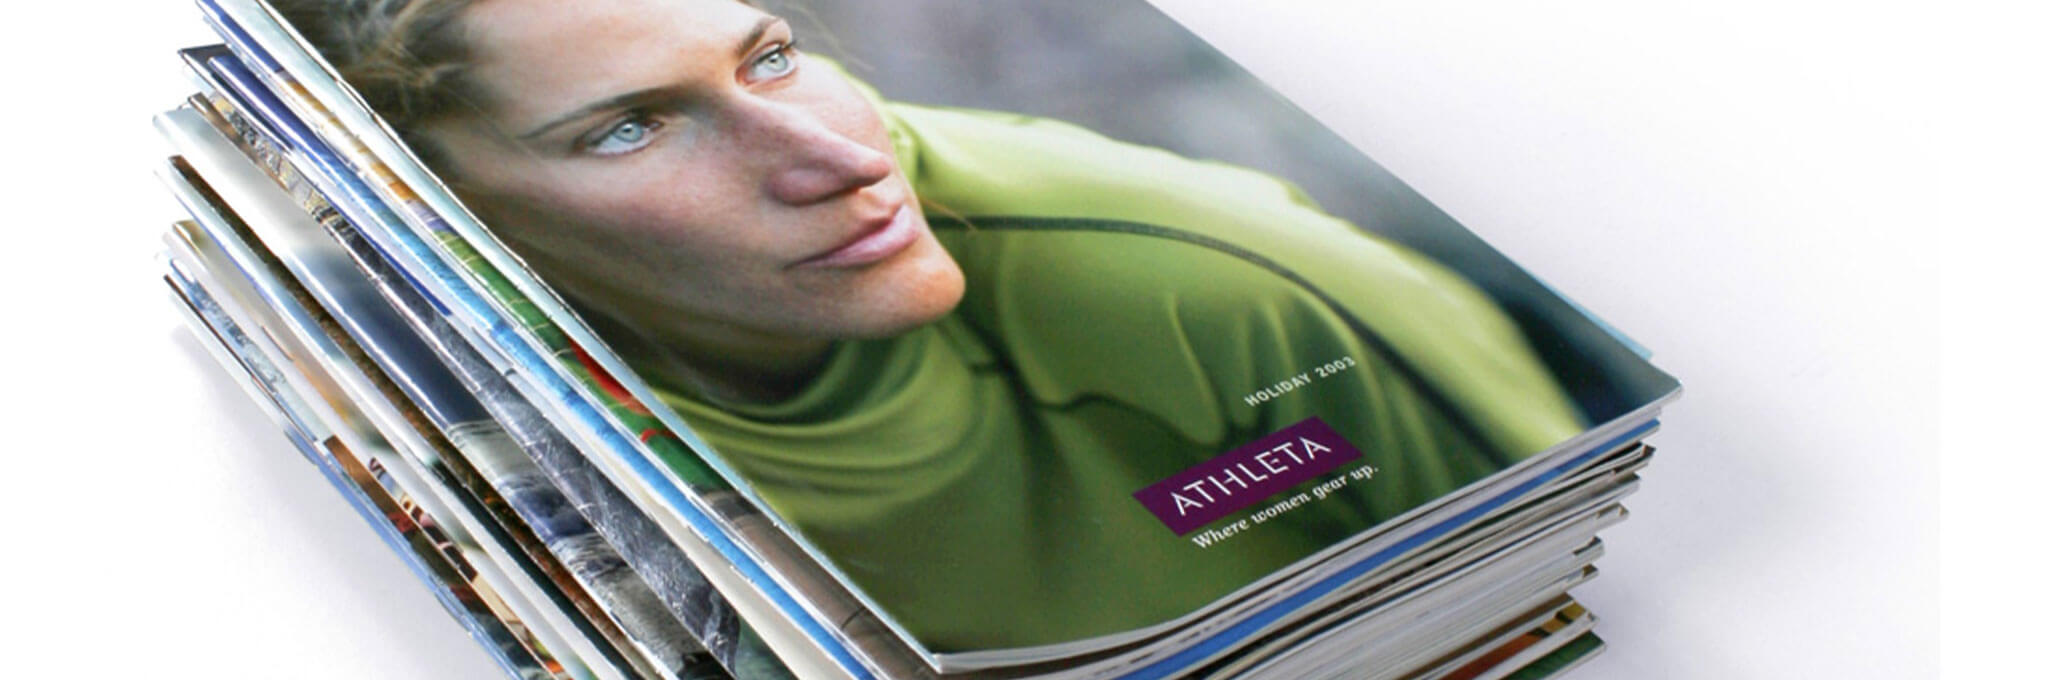 Stack of Athleta catalogs topped with cover of a woman in a green shirt